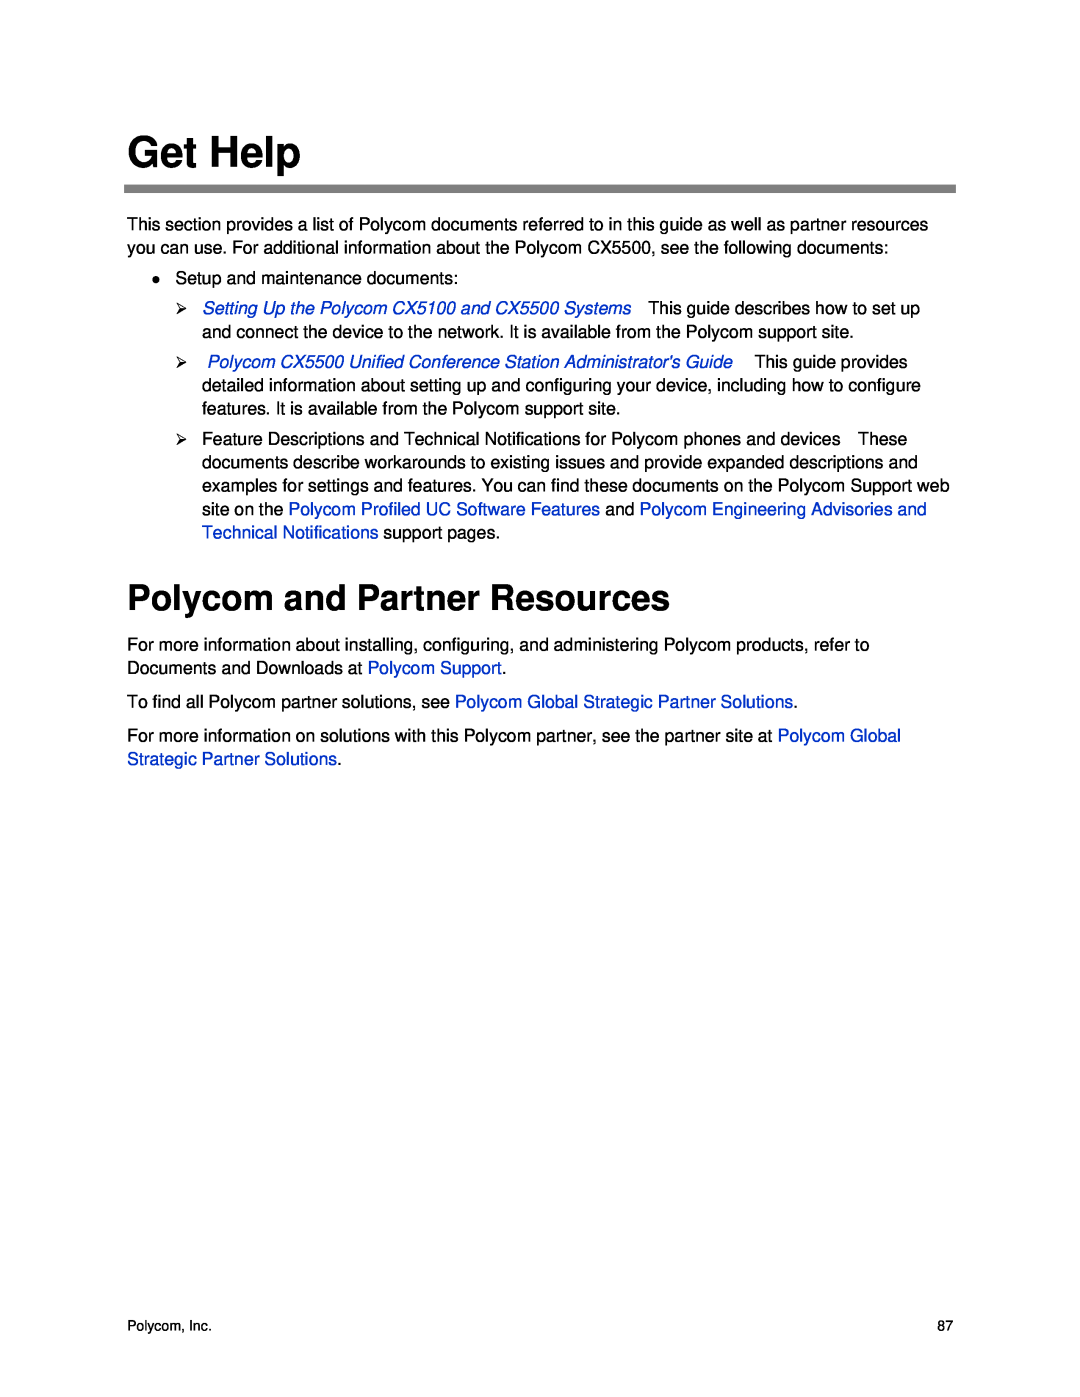 Polycom CX5500 manual Get Help, Polycom and Partner Resources, Technical Notifications support pages 